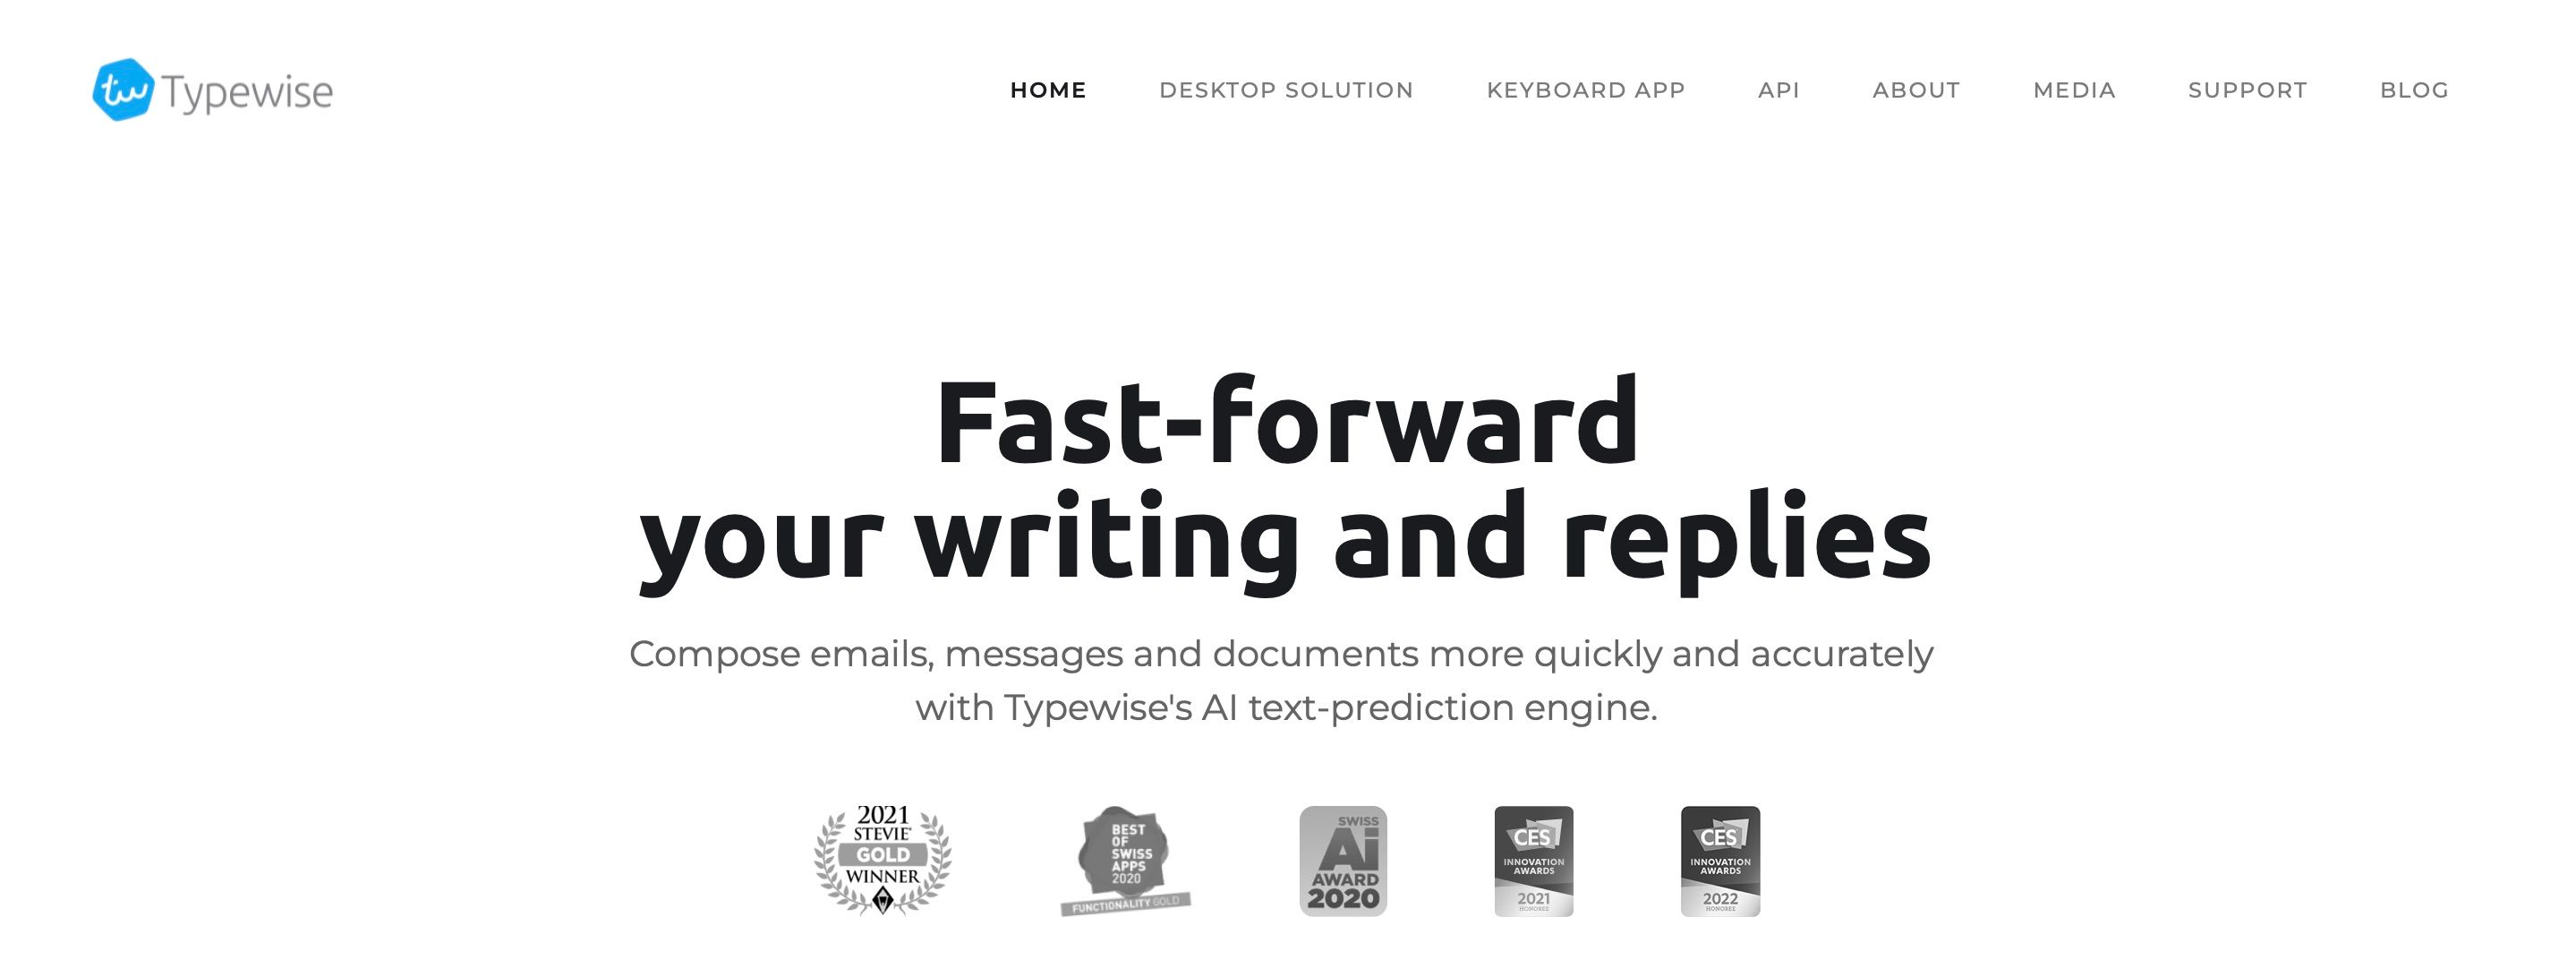 TypeWise Home Page